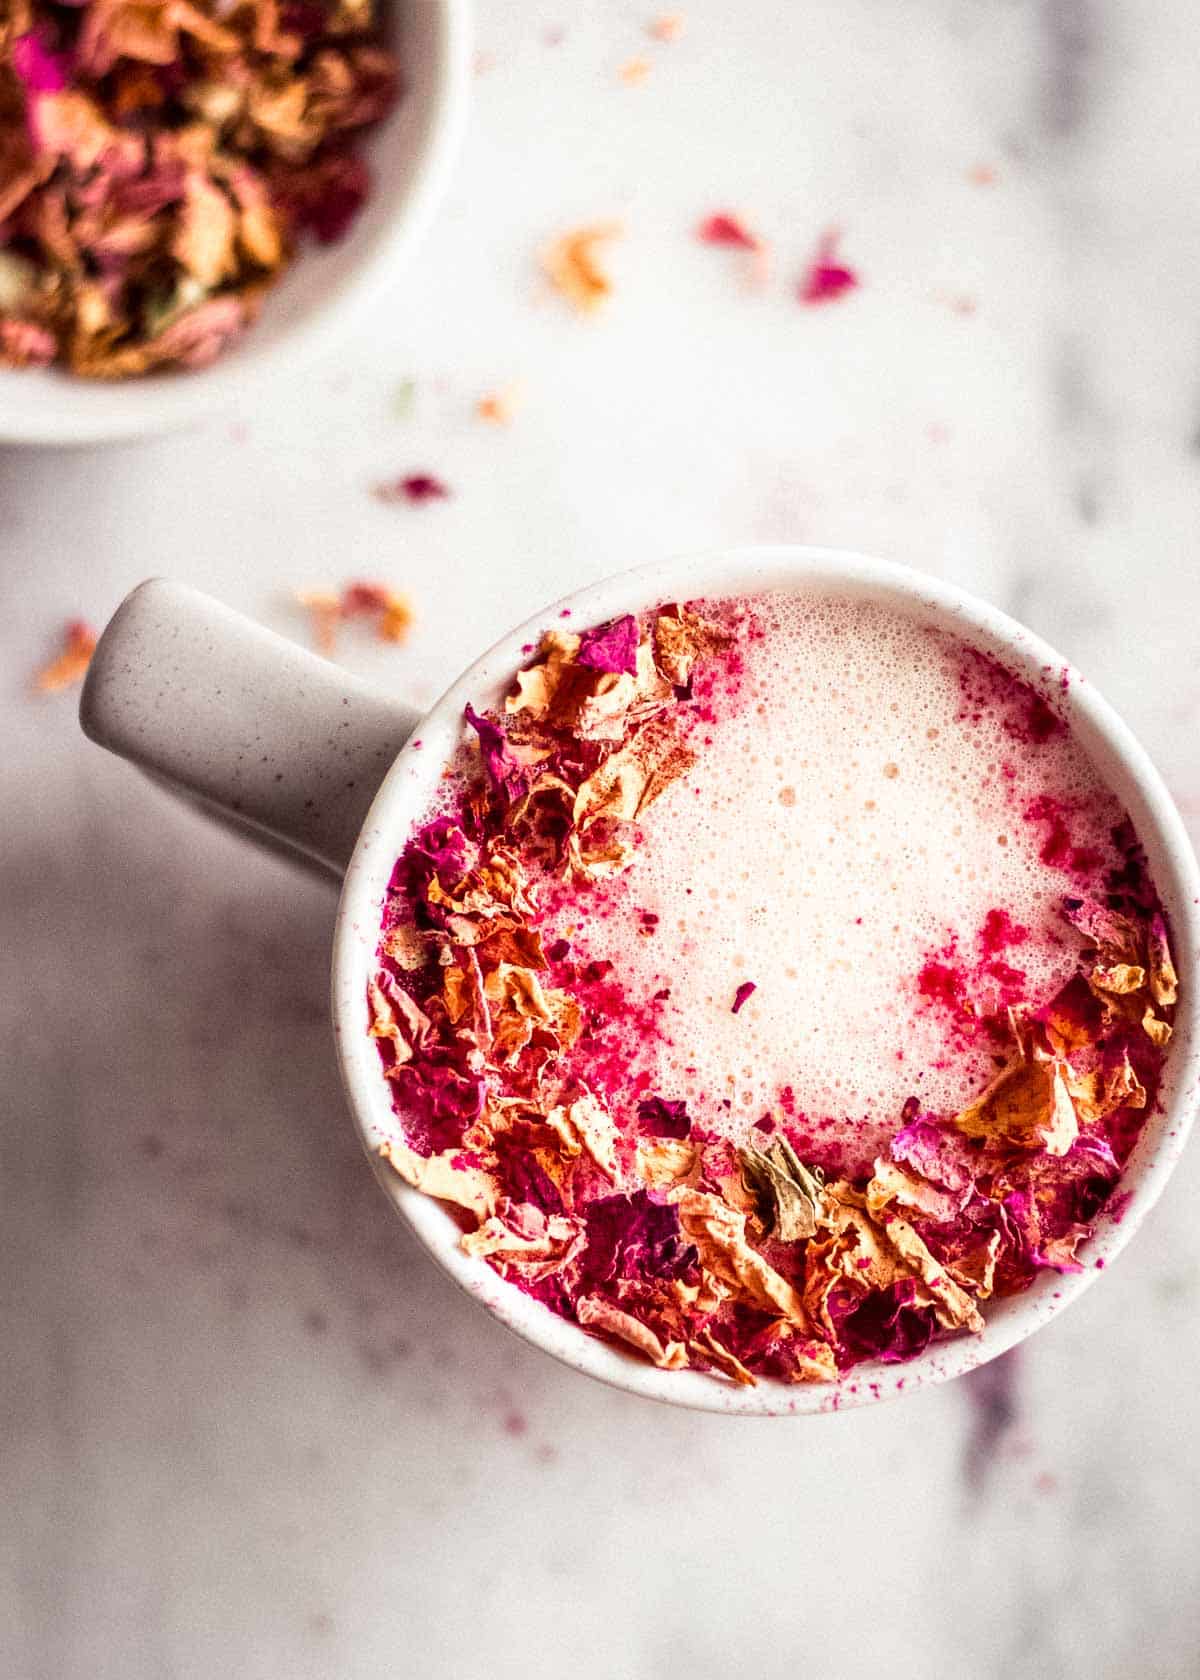 Overhead shot of dairy free rose latte decorated with rose petals. A bowl of petals is nearby.